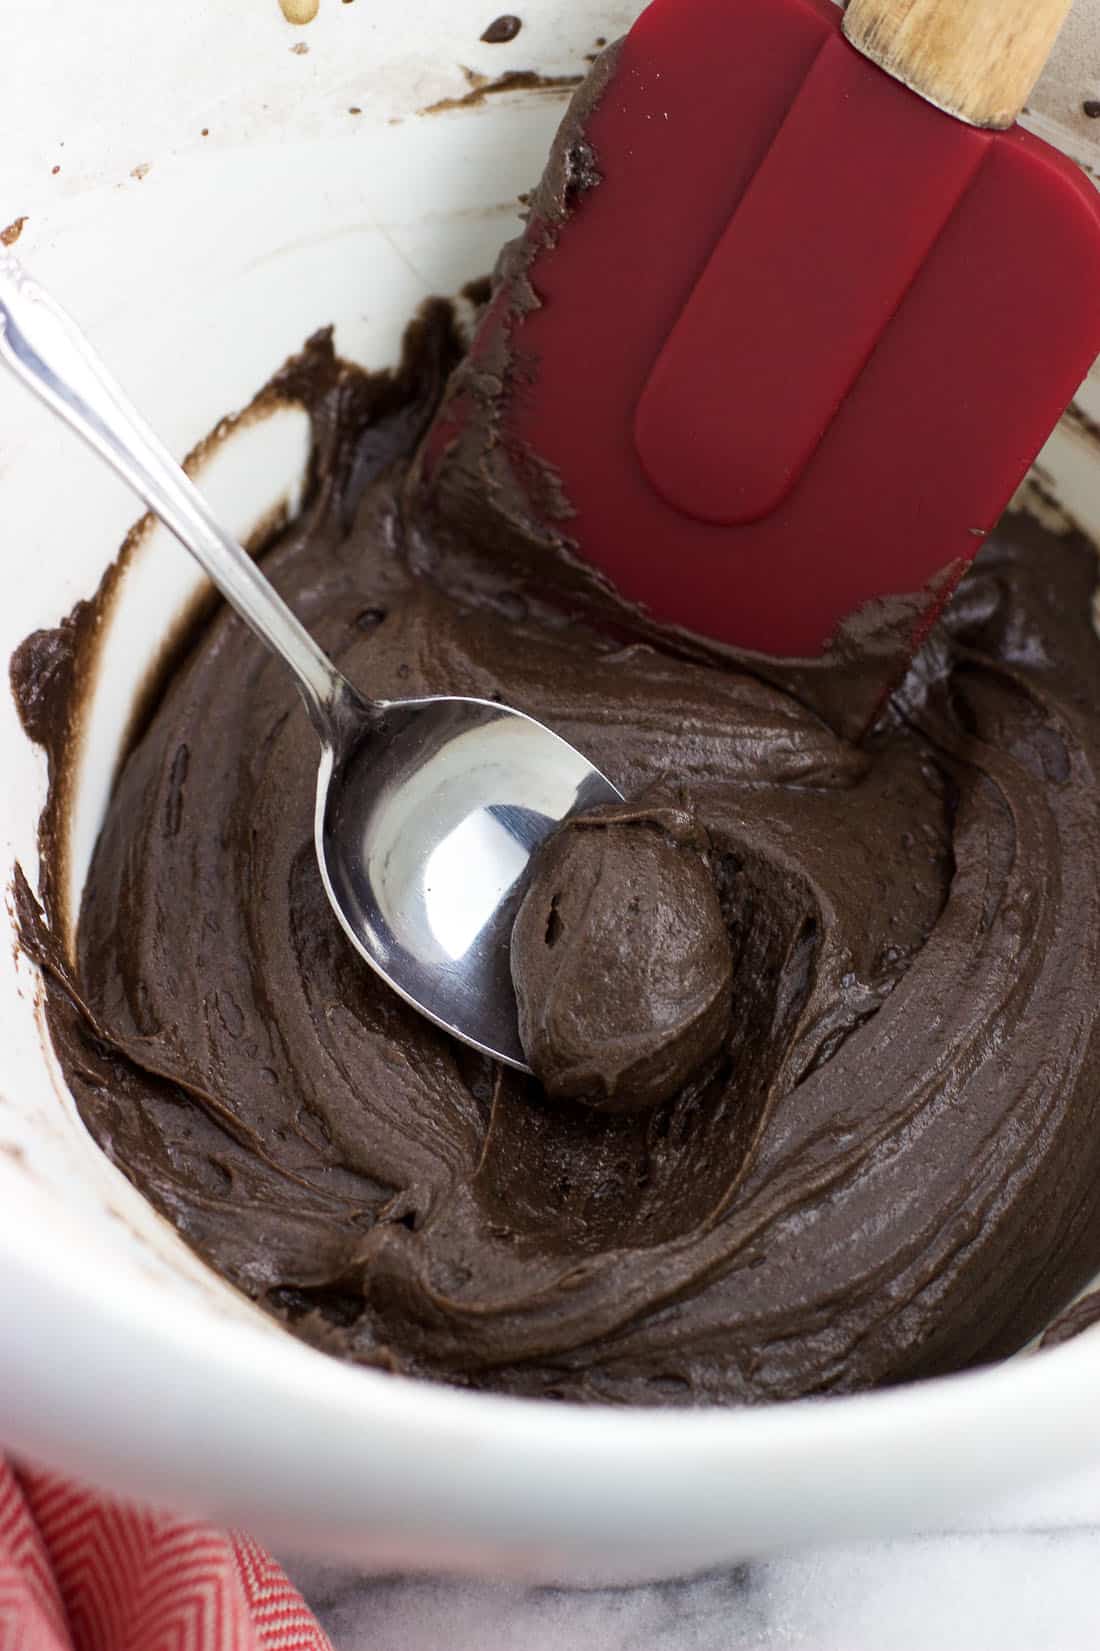 A spoon scooping a ball of cookie batter out of the mixing bowl.